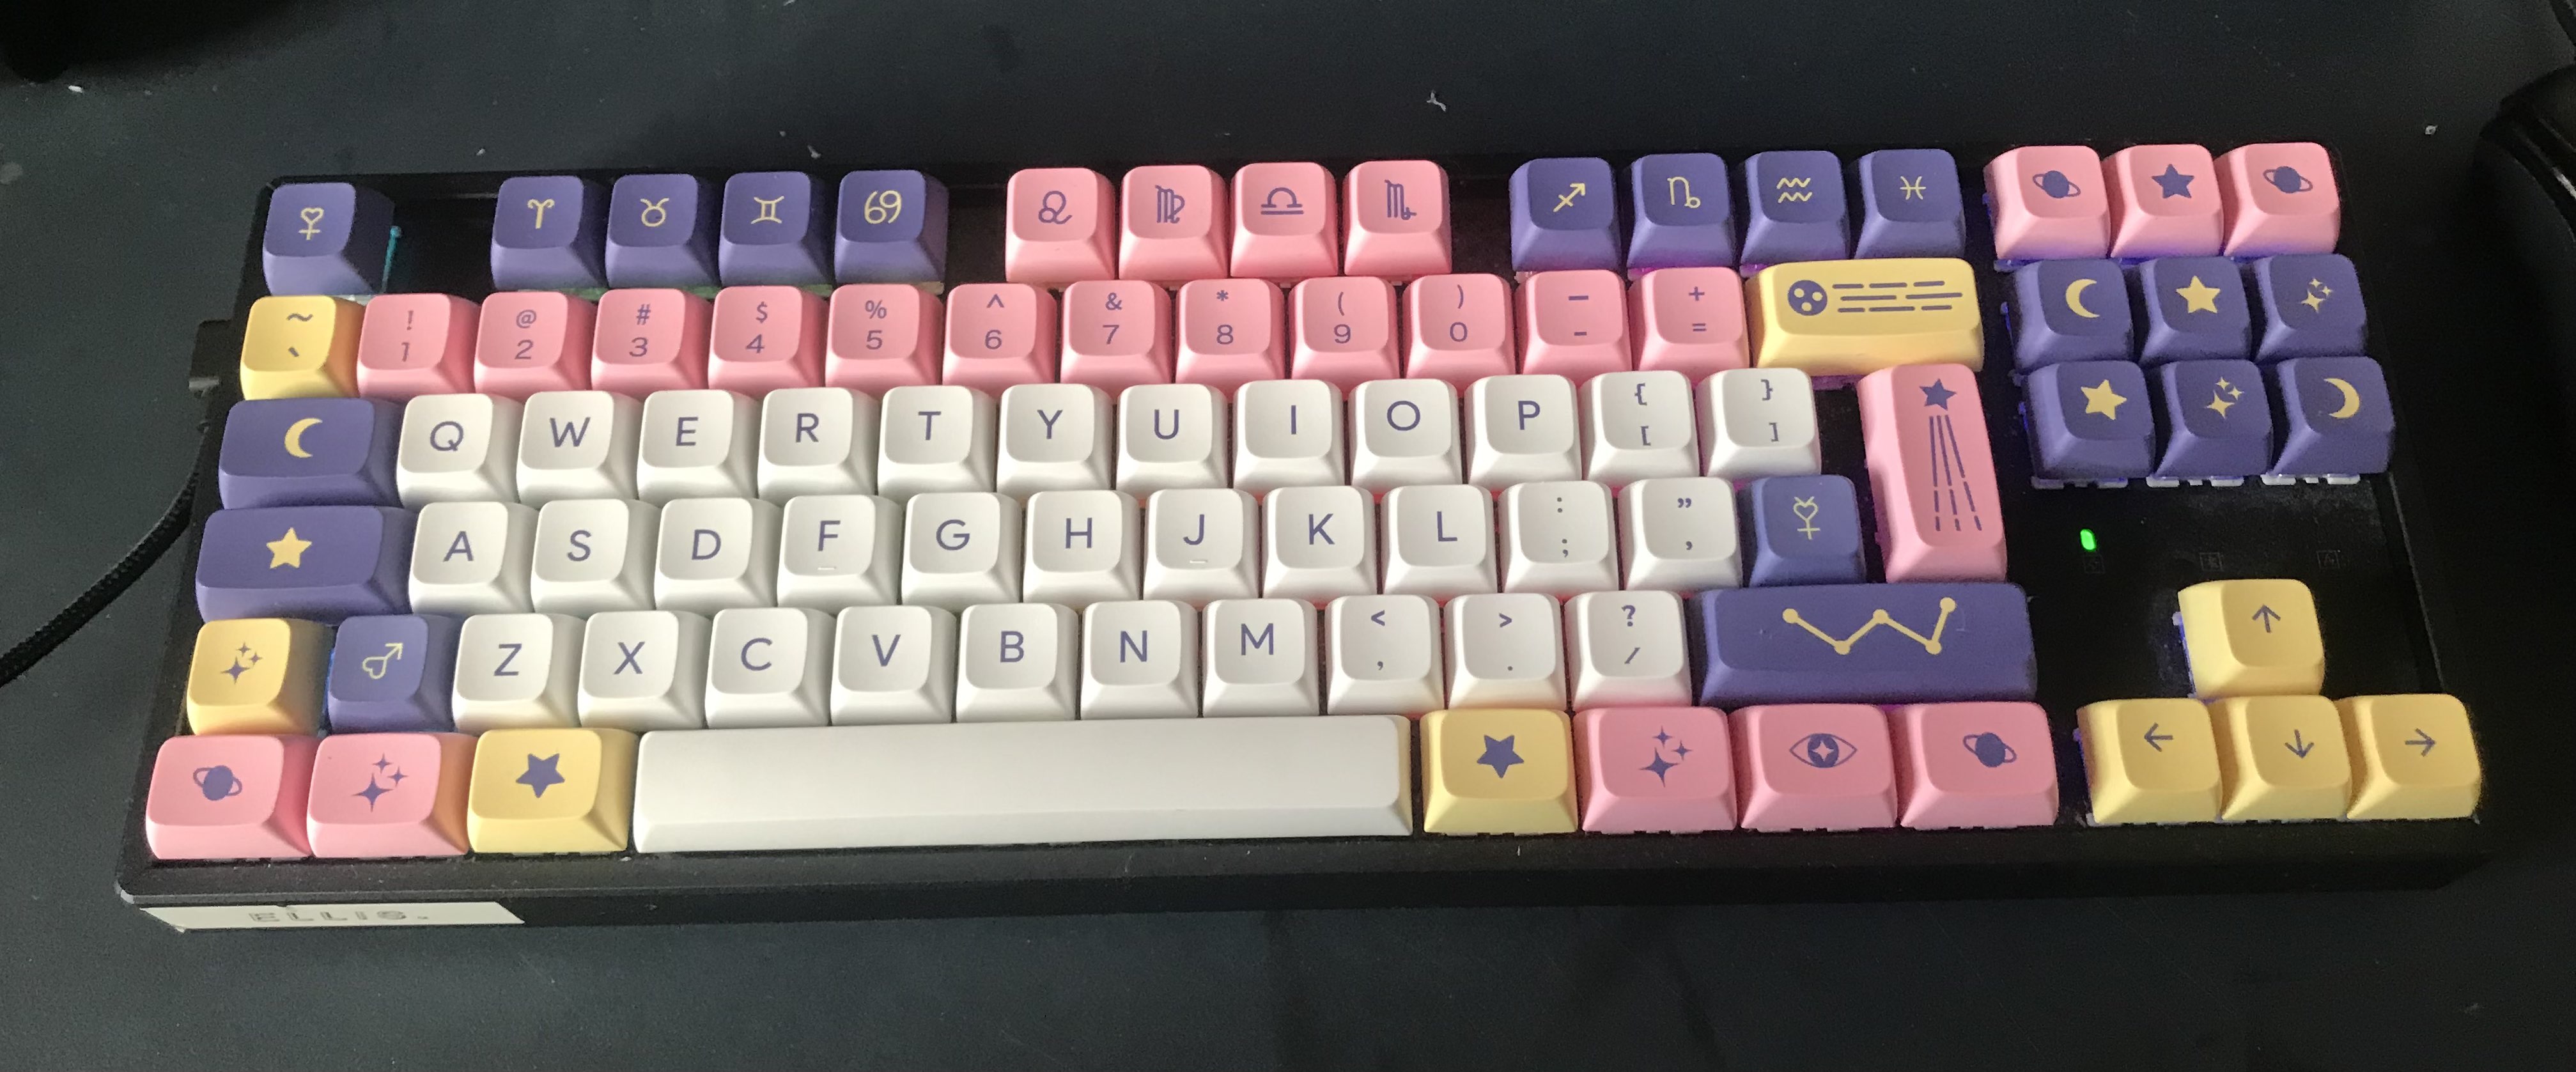 A photo of a mechanical keyboard with keycaps in white, pink, yellow and purple colours, with star and astrology decals on the special keys.